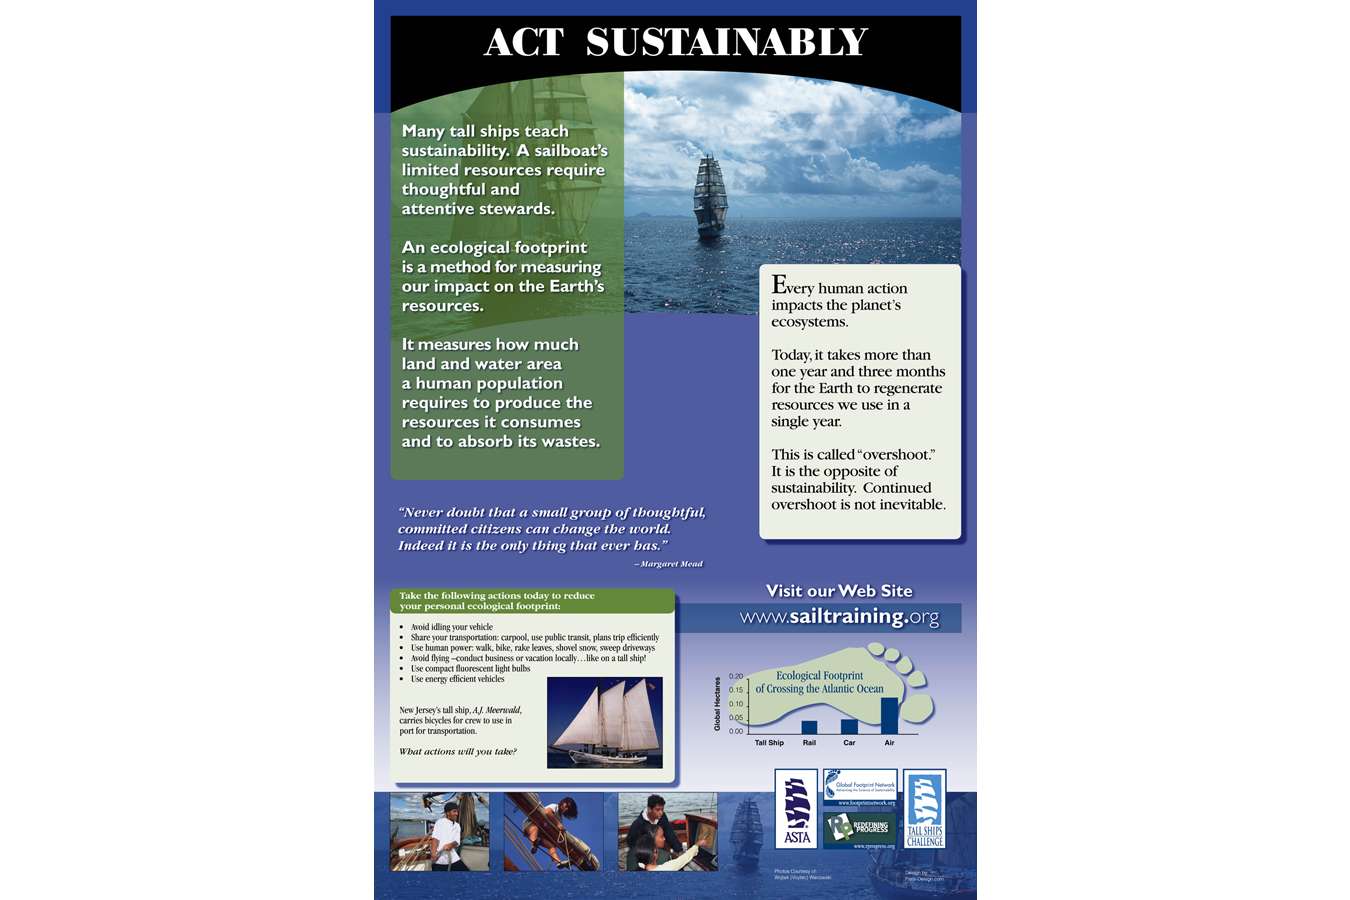 ASTA PF Sustain act : At sea education includes teaching sustainability 